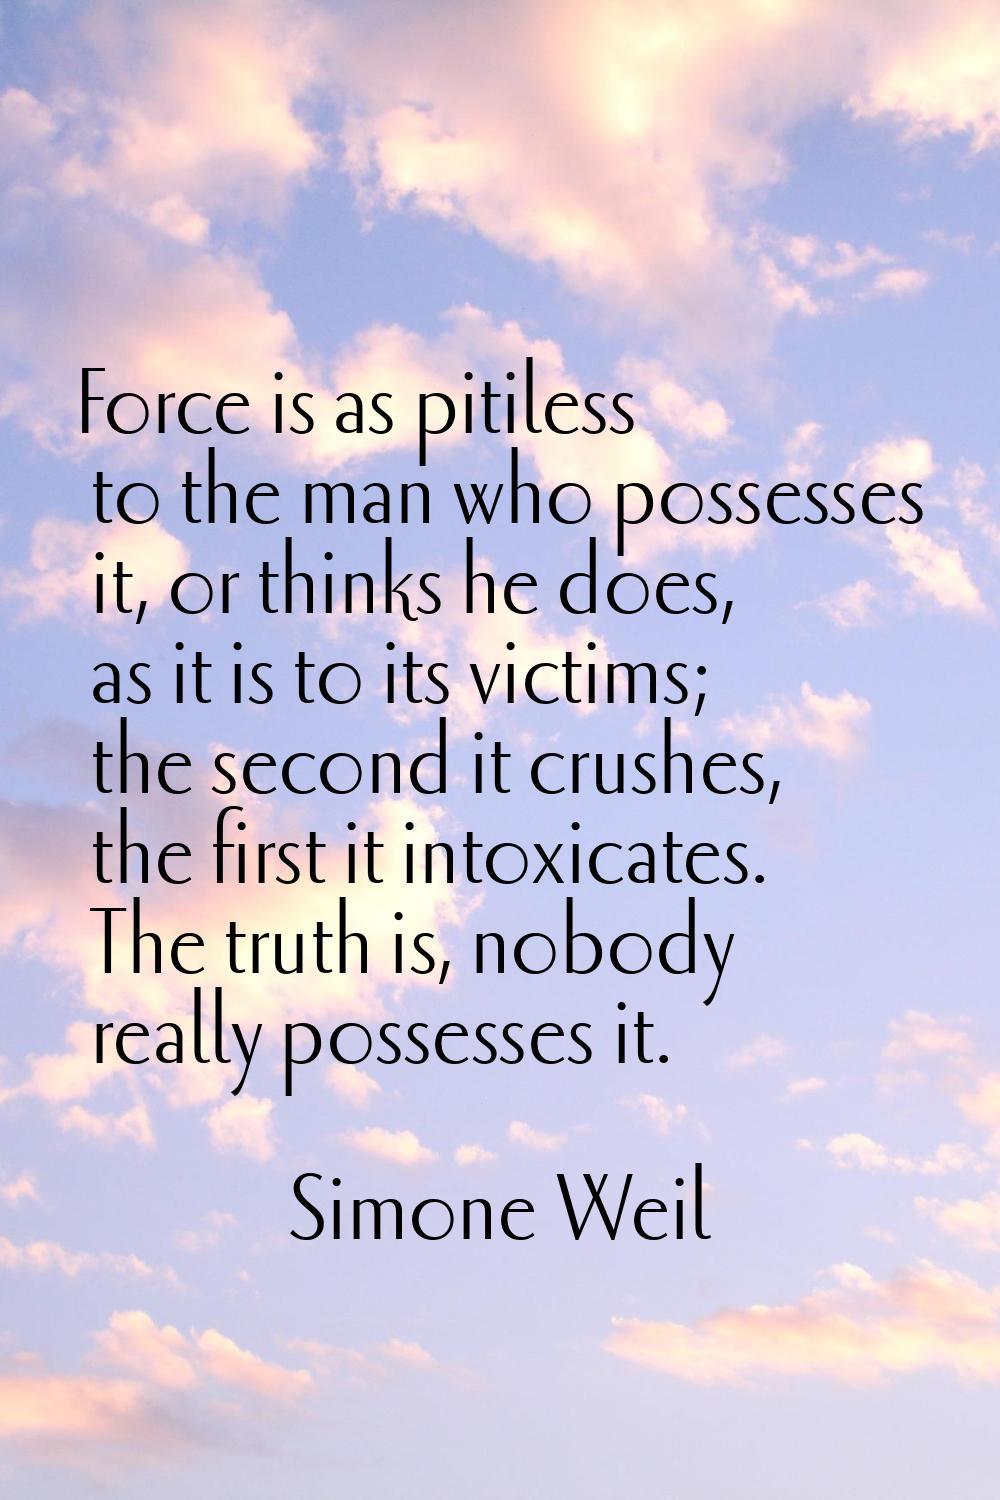 Force is as pitiless to the man who possesses it, or thinks he does, as it is to its victims; the s